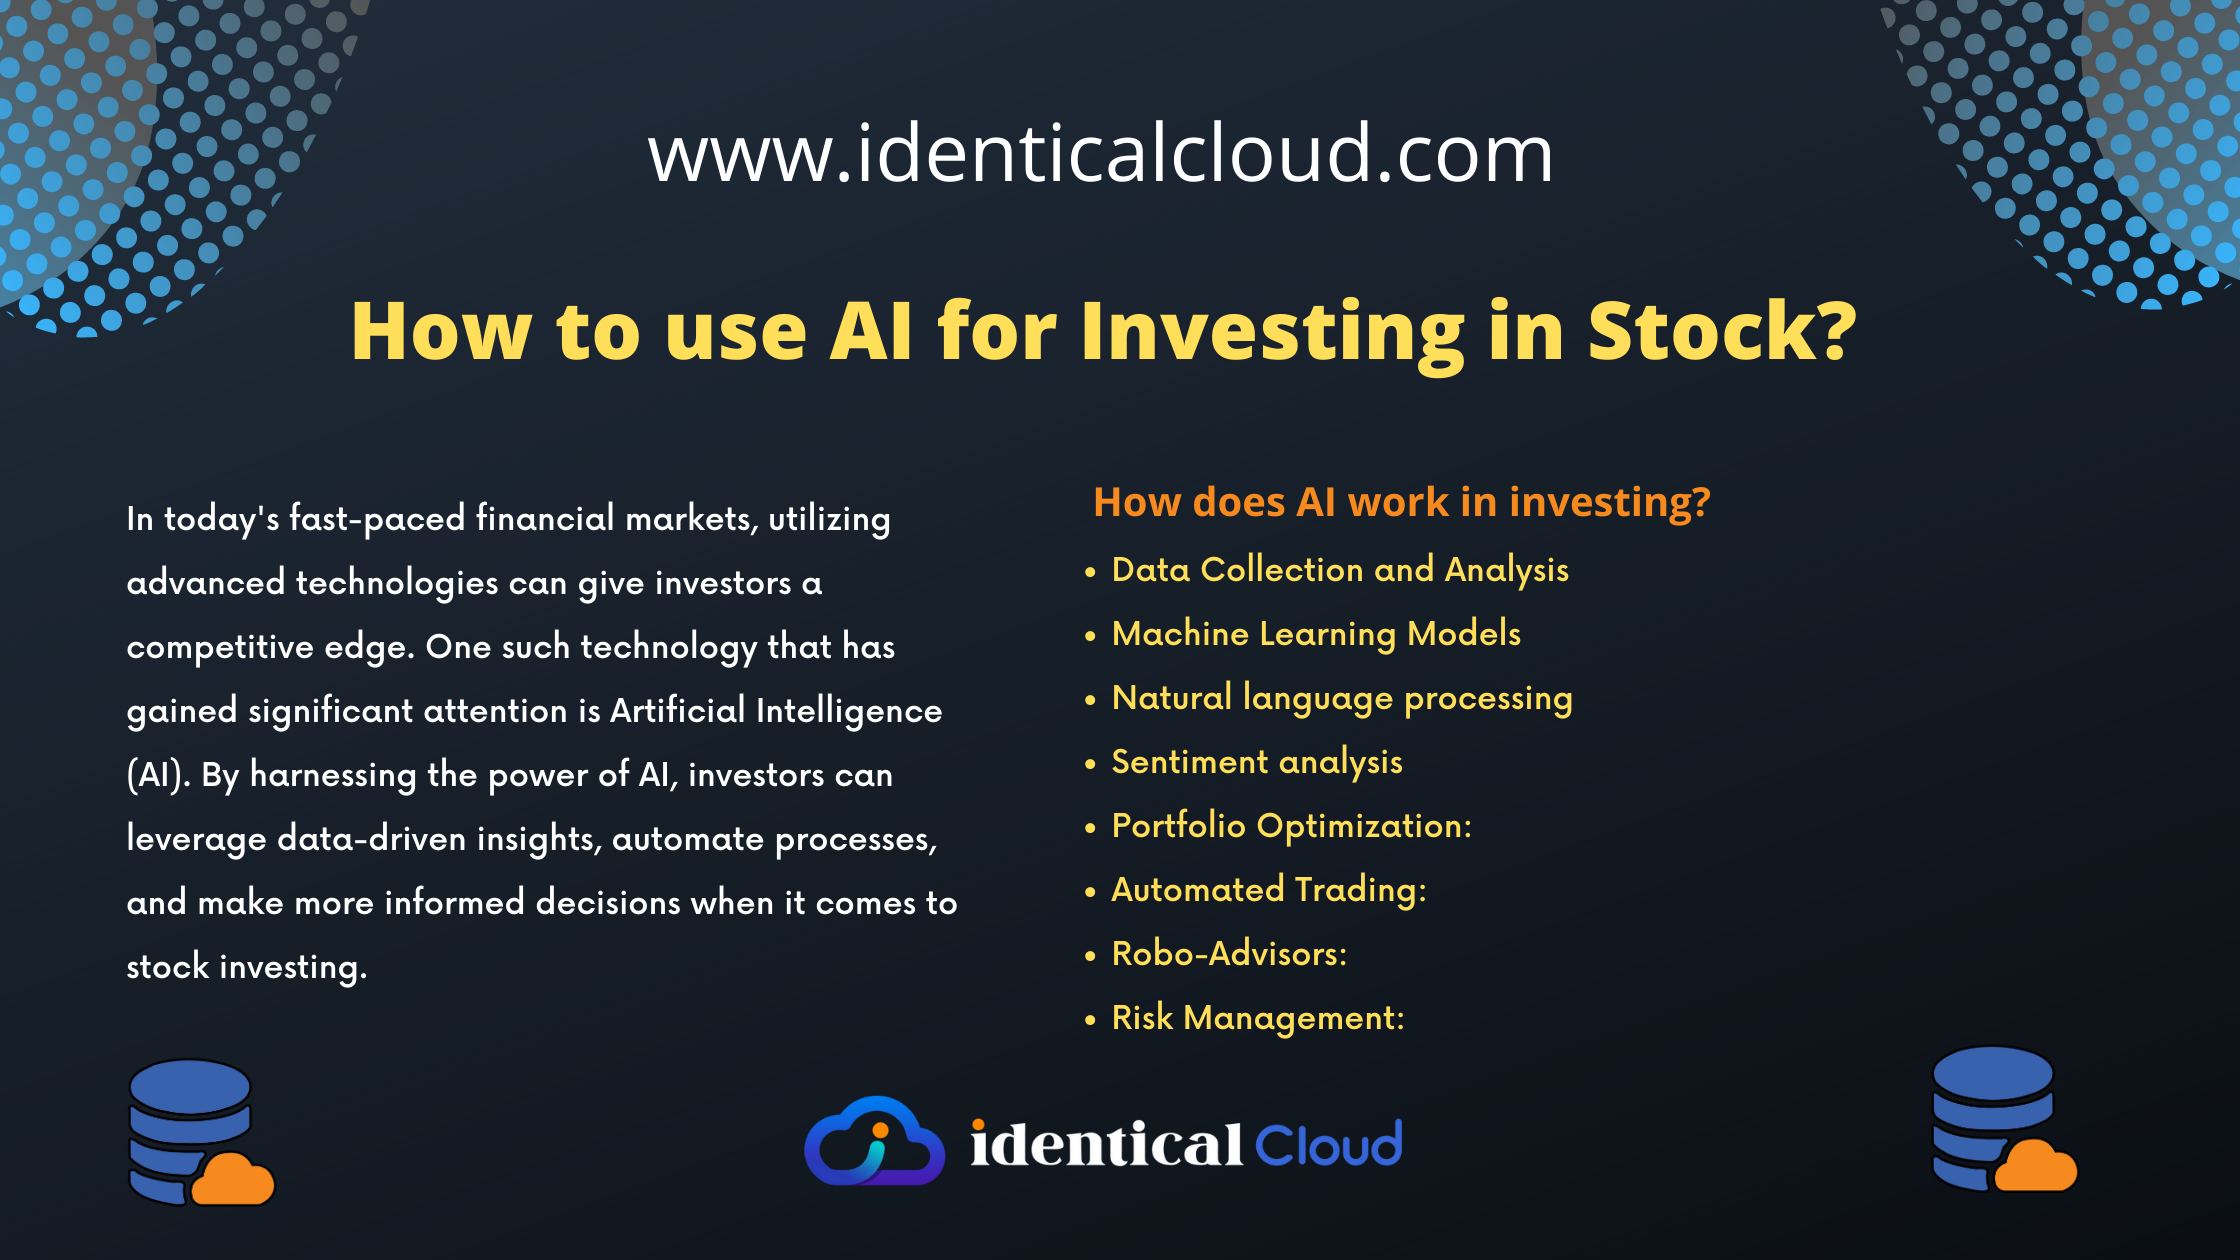 How to use AI for Investing in Stock?